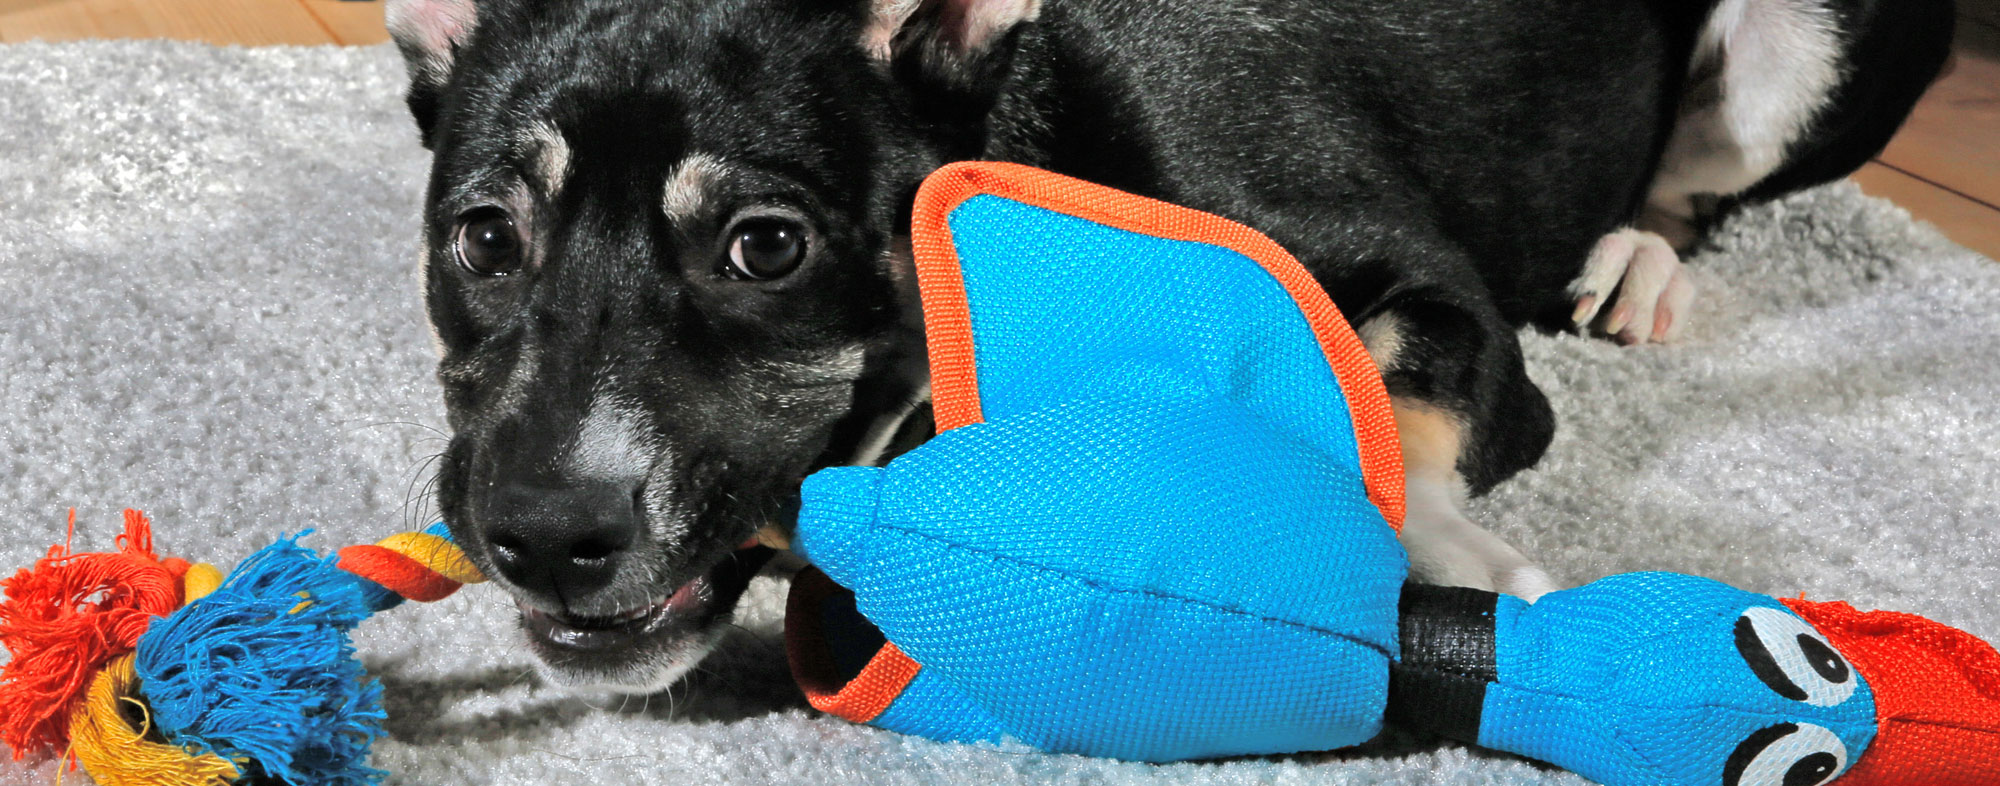 Gauge your dog's personality before buying a new toy for them